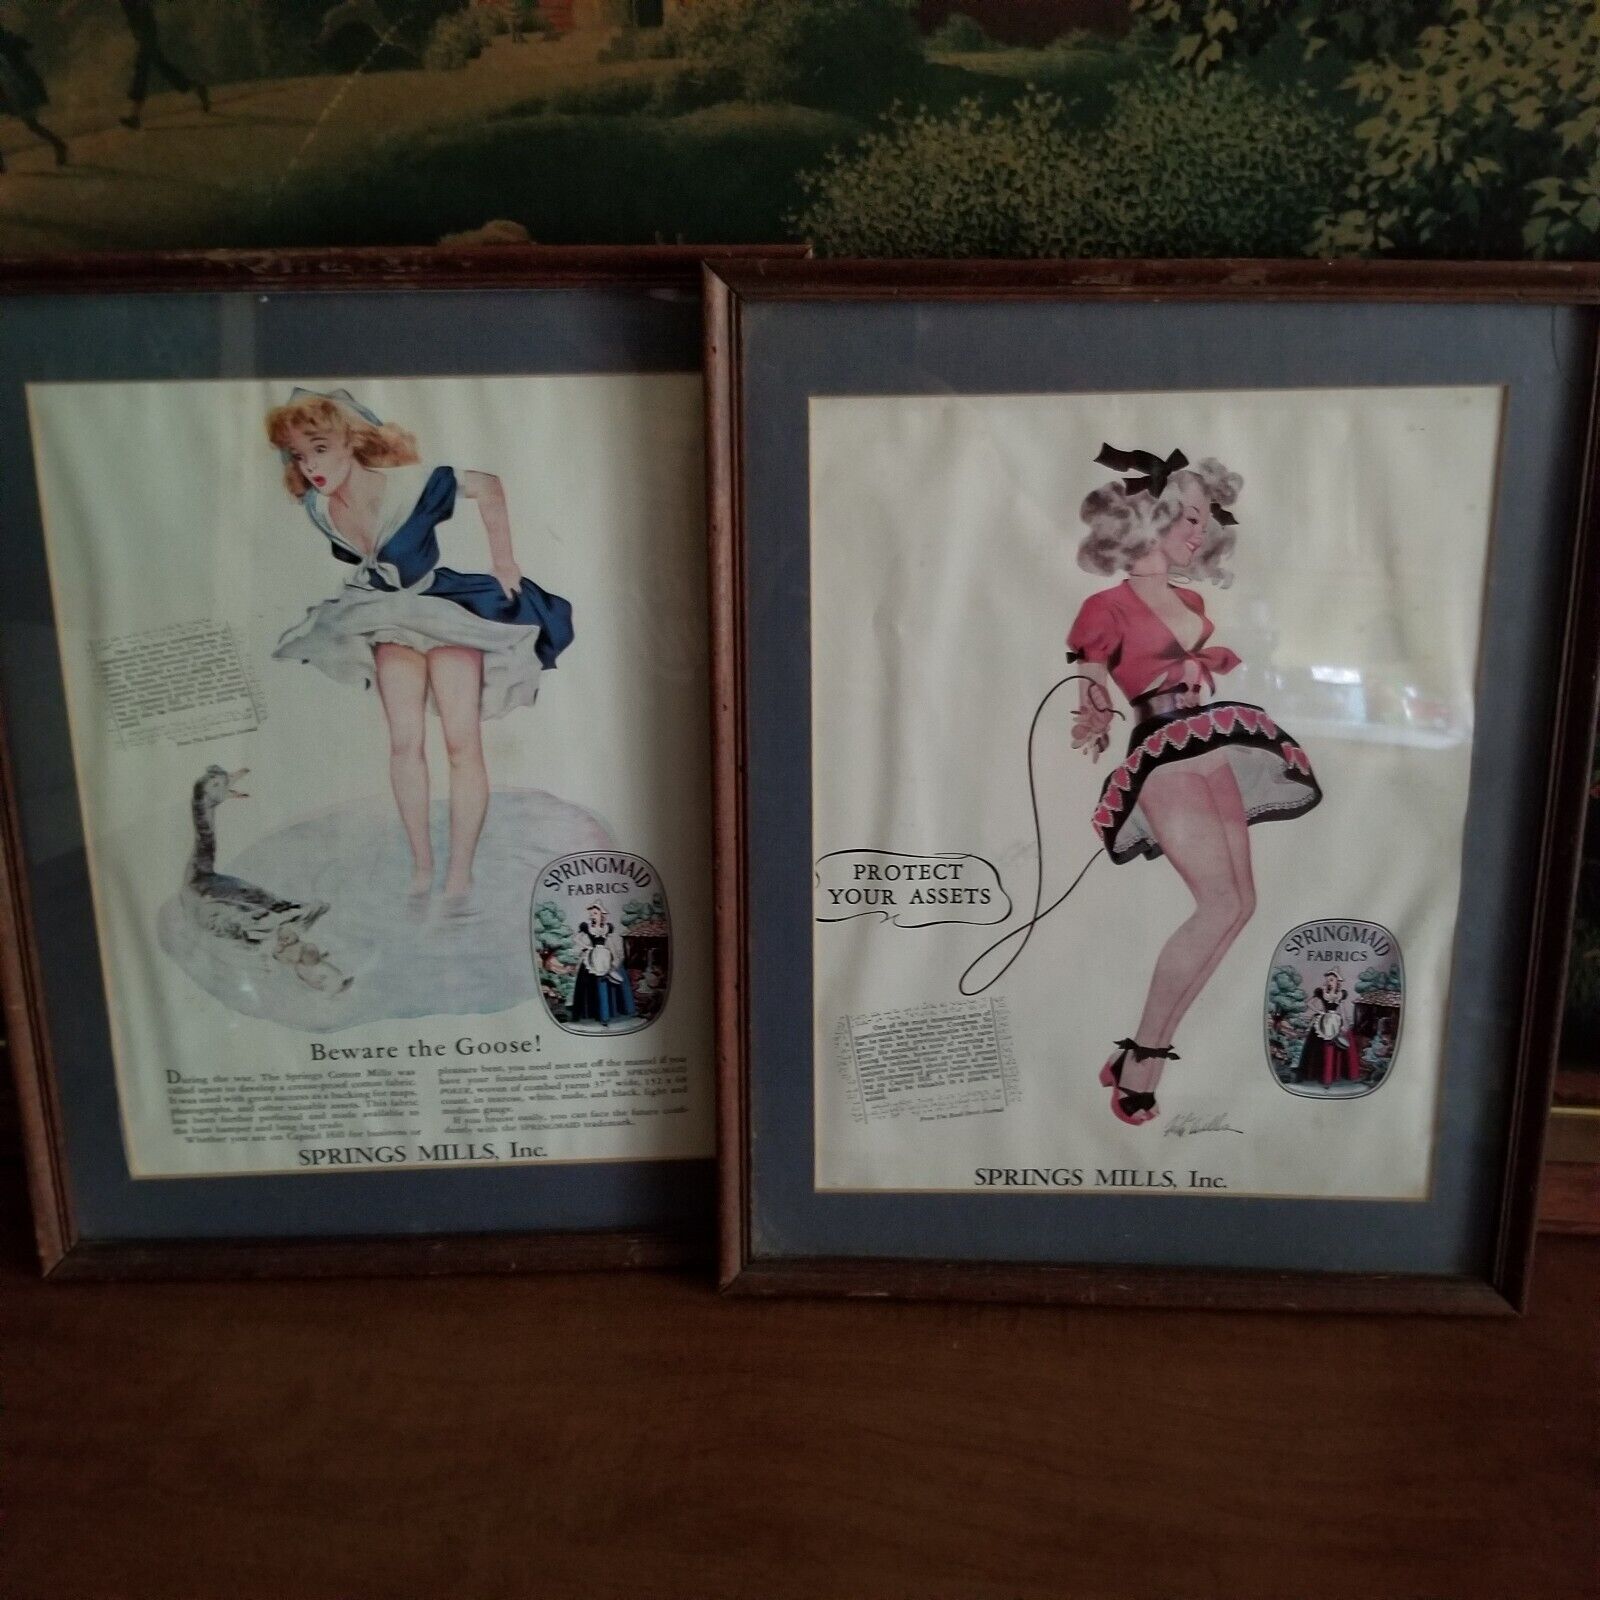 RARE Spring Maid Girl pin up advertisement prints, lot of 2, 1948, framed